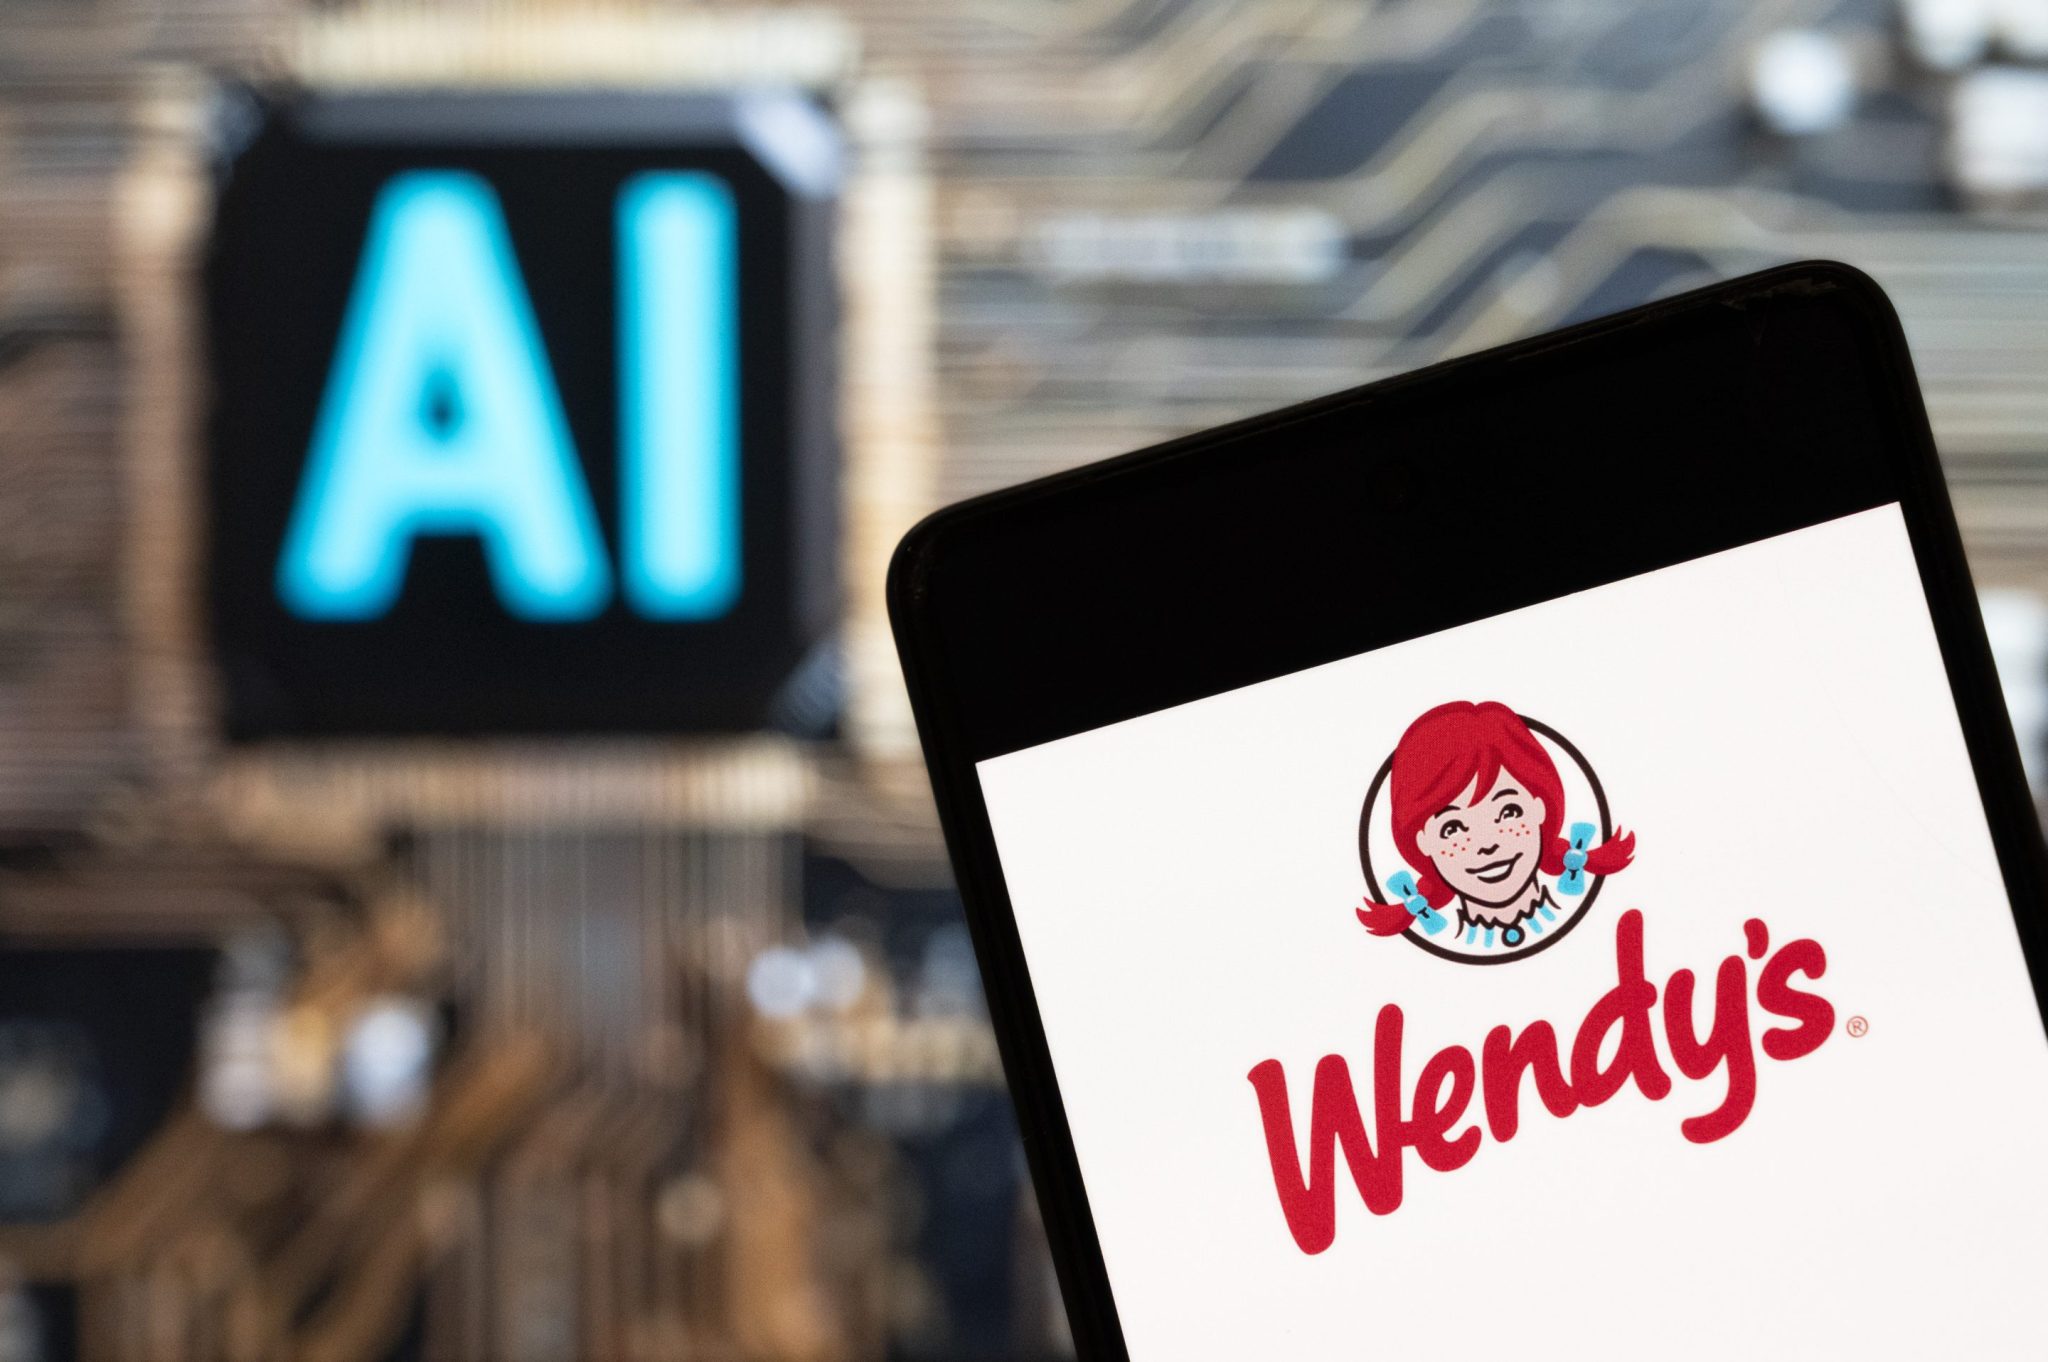 Rideshares, plane tickets, and now spicy chicken sandwiches? Why Wendy’s is bringing AI-powered surge pricing to fast food